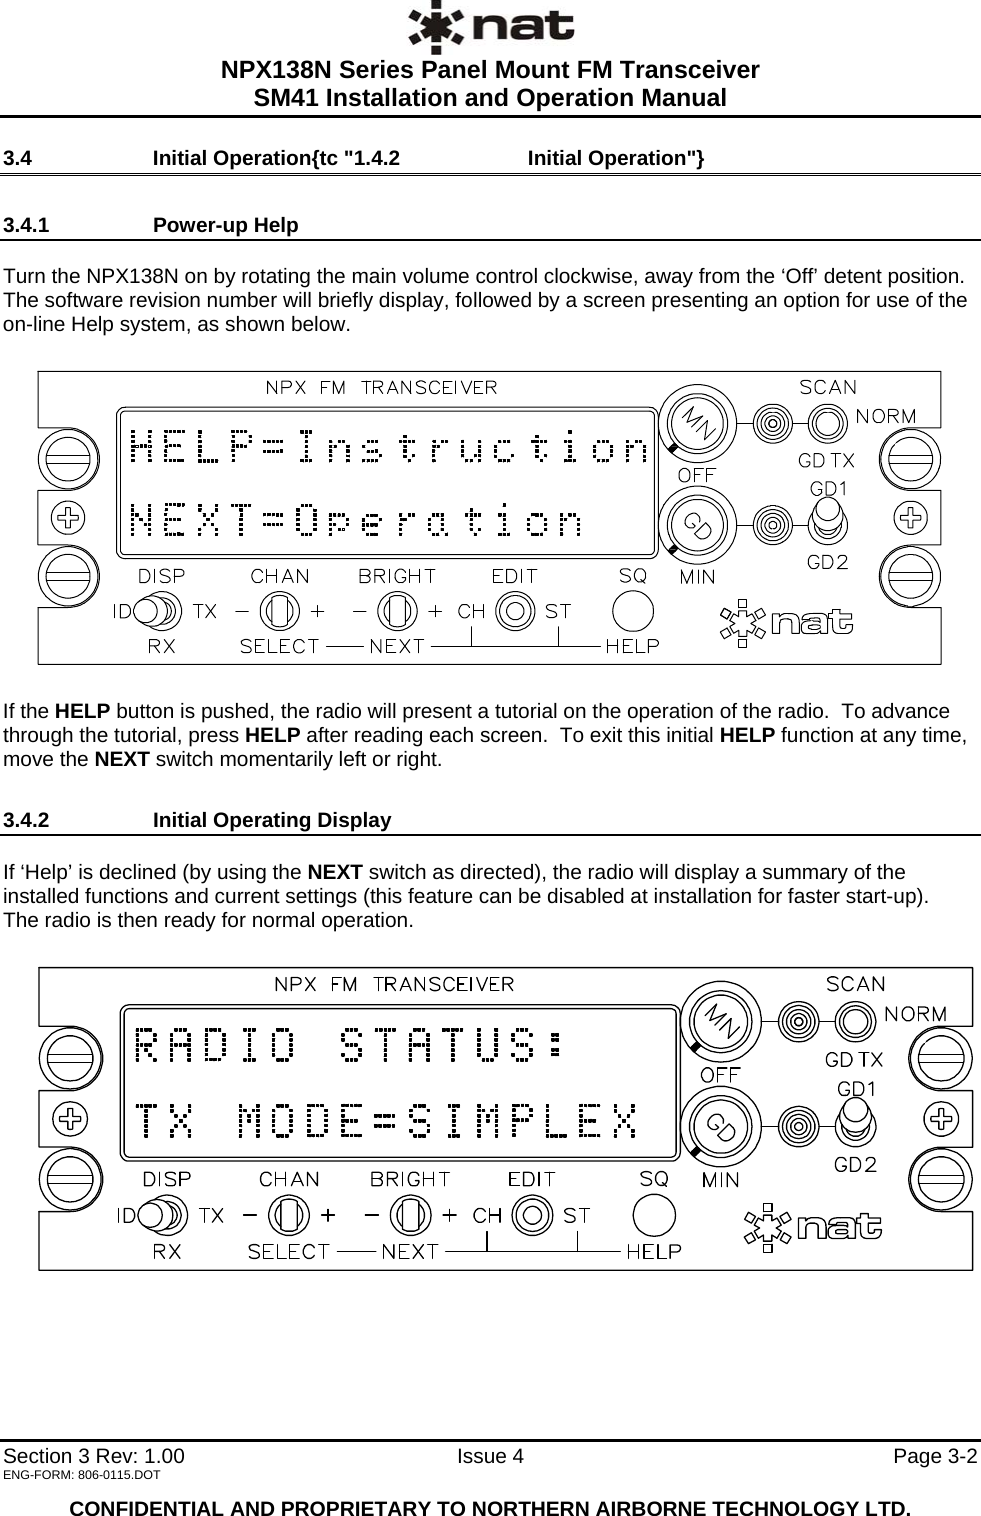  NPX138N Series Panel Mount FM Transceiver  SM41 Installation and Operation Manual   Section 3 Rev: 1.00   Issue 4  Page 3-2 3.4  Initial Operation{tc &quot;1.4.2    Initial Operation&quot;} 3.4.1 Power-up Help  Turn the NPX138N on by rotating the main volume control clockwise, away from the ‘Off’ detent position. The software revision number will briefly display, followed by a screen presenting an option for use of the on-line Help system, as shown below.    If the HELP button is pushed, the radio will present a tutorial on the operation of the radio.  To advance through the tutorial, press HELP after reading each screen.  To exit this initial HELP function at any time, move the NEXT switch momentarily left or right. 3.4.2  Initial Operating Display  If ‘Help’ is declined (by using the NEXT switch as directed), the radio will display a summary of the installed functions and current settings (this feature can be disabled at installation for faster start-up).  The radio is then ready for normal operation.   ENG-FORM: 806-0115.DOT  CONFIDENTIAL AND PROPRIETARY TO NORTHERN AIRBORNE TECHNOLOGY LTD. 